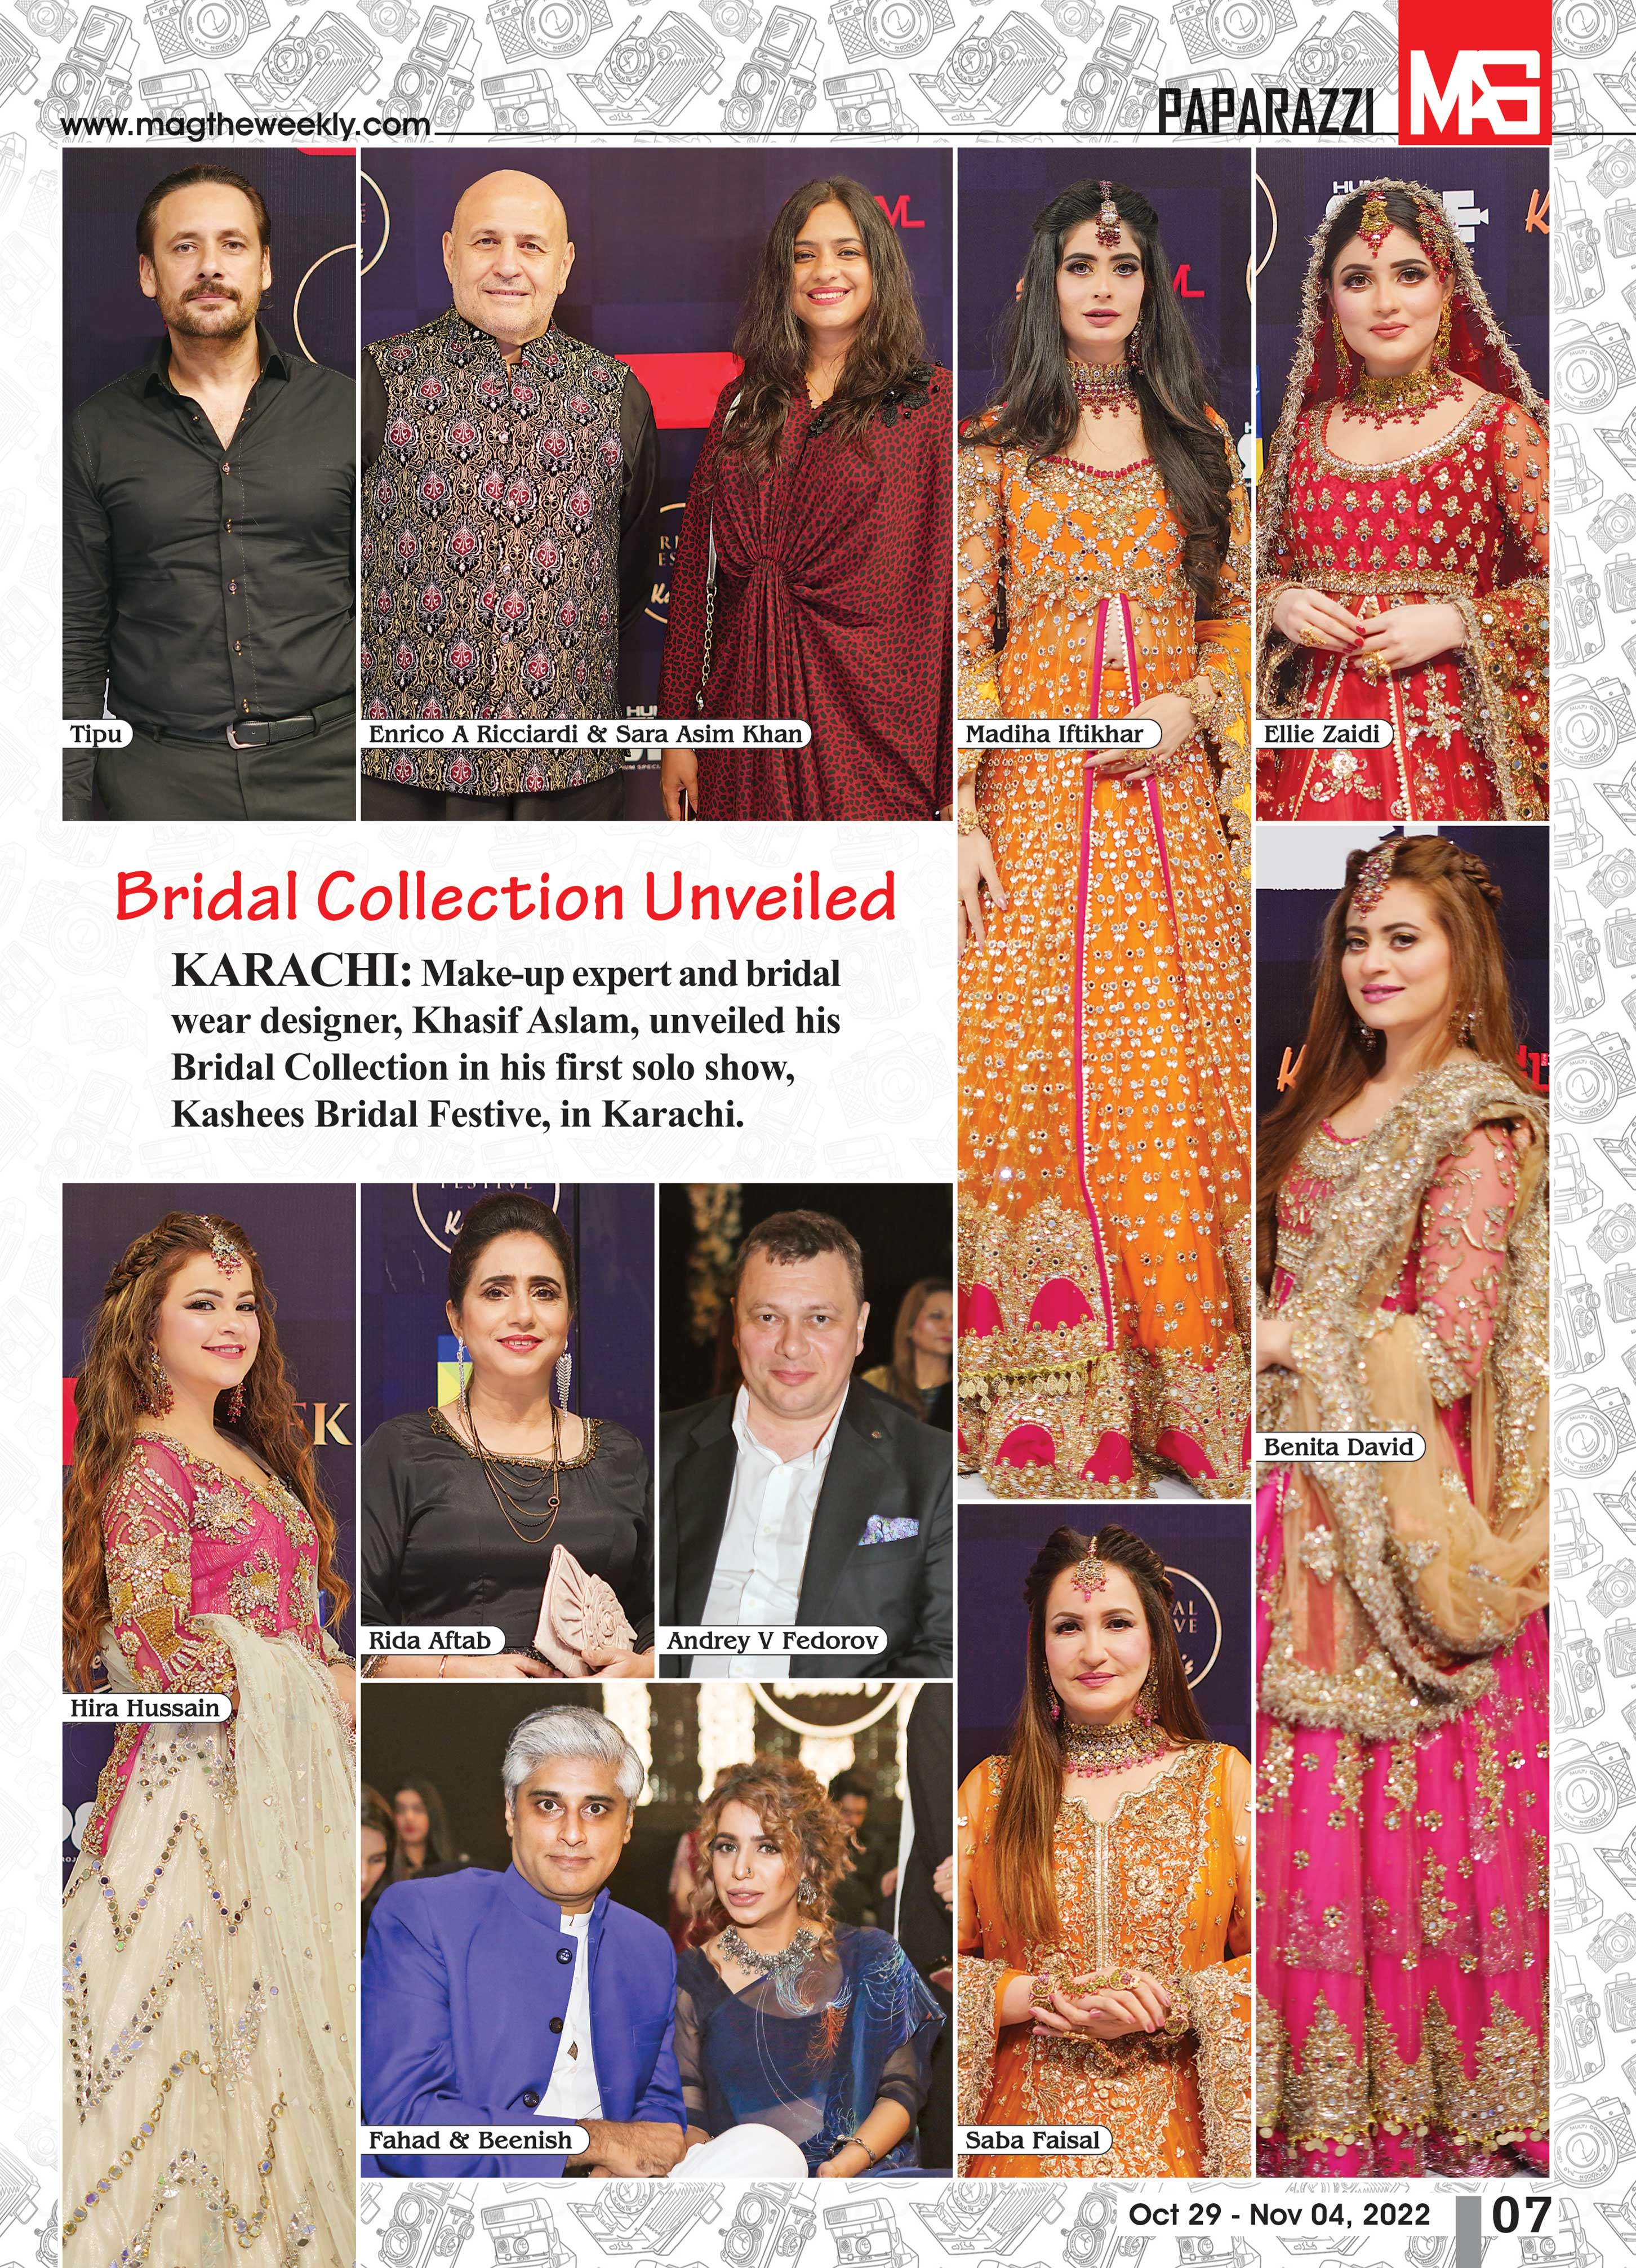 Khasif Aslam unveils Bridal Collection in his first solo show